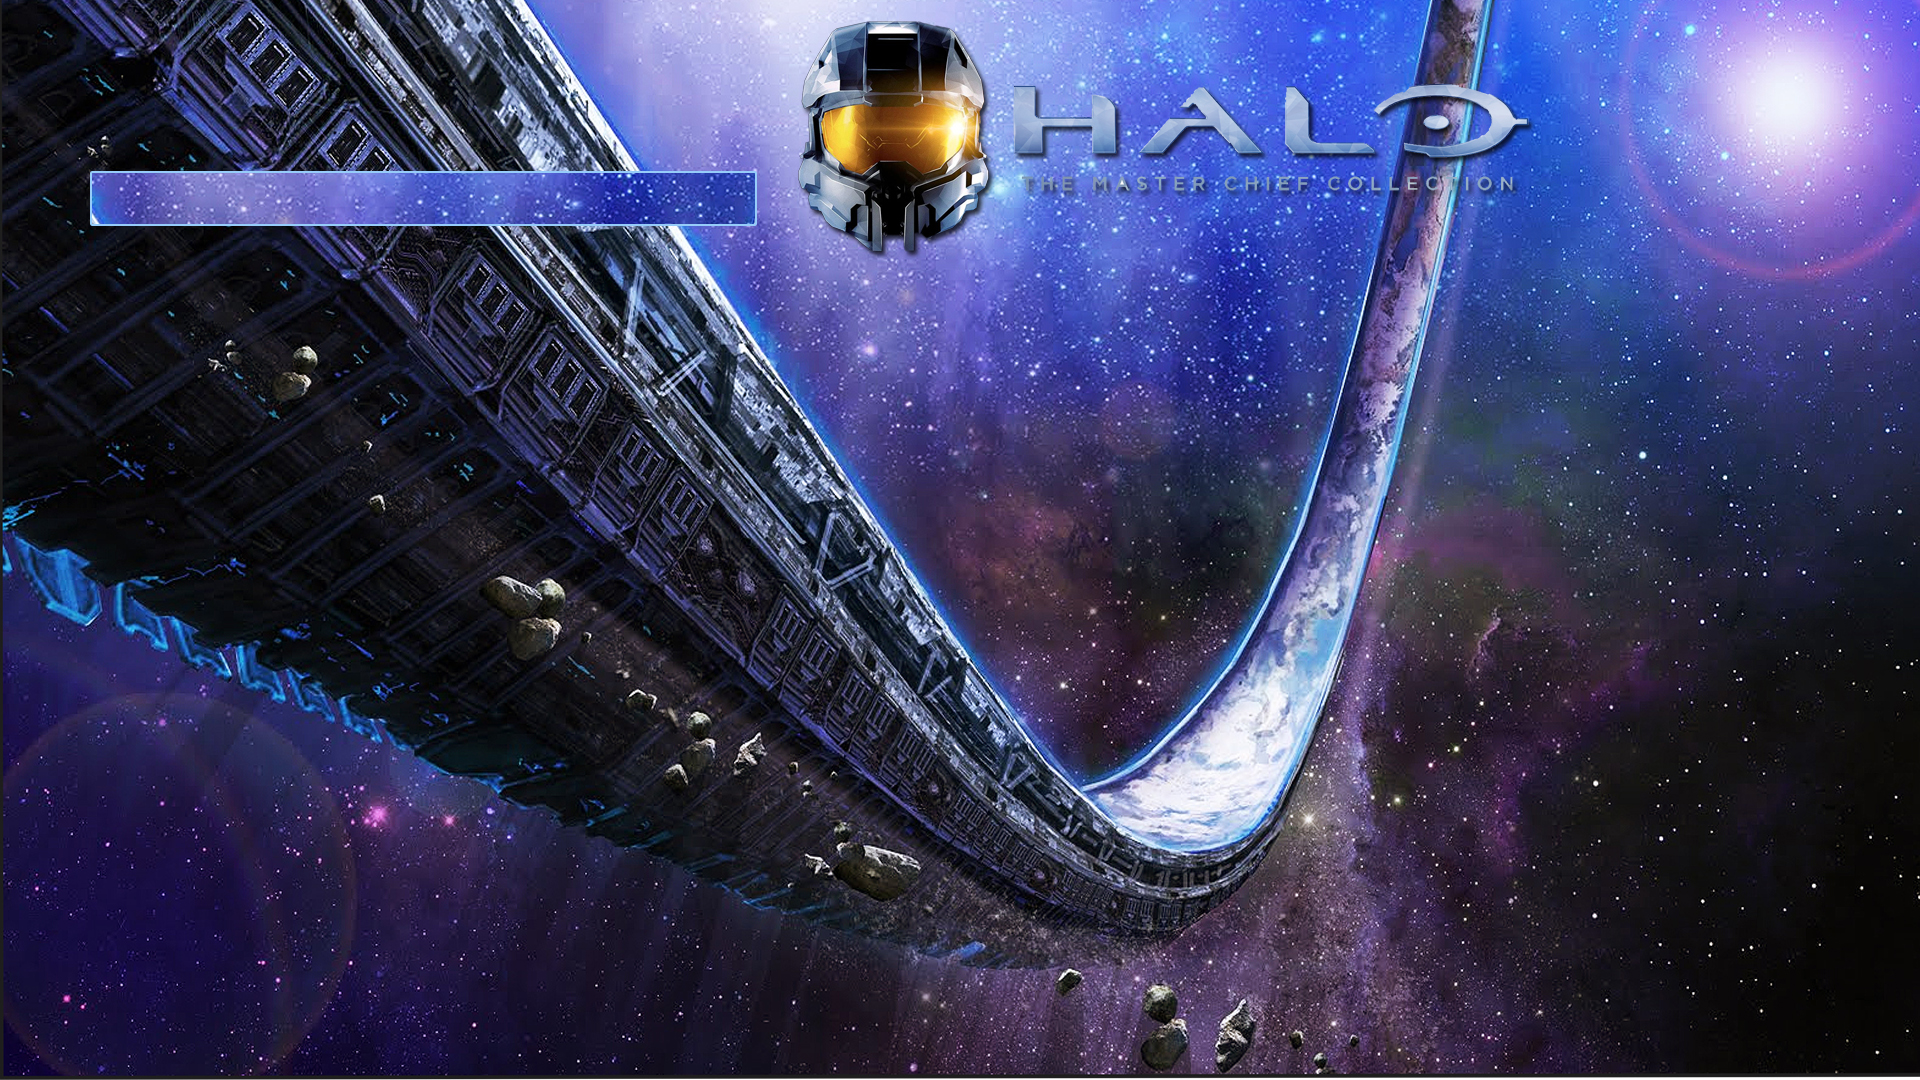 Halo The Master Chief Collection Xbox One Background